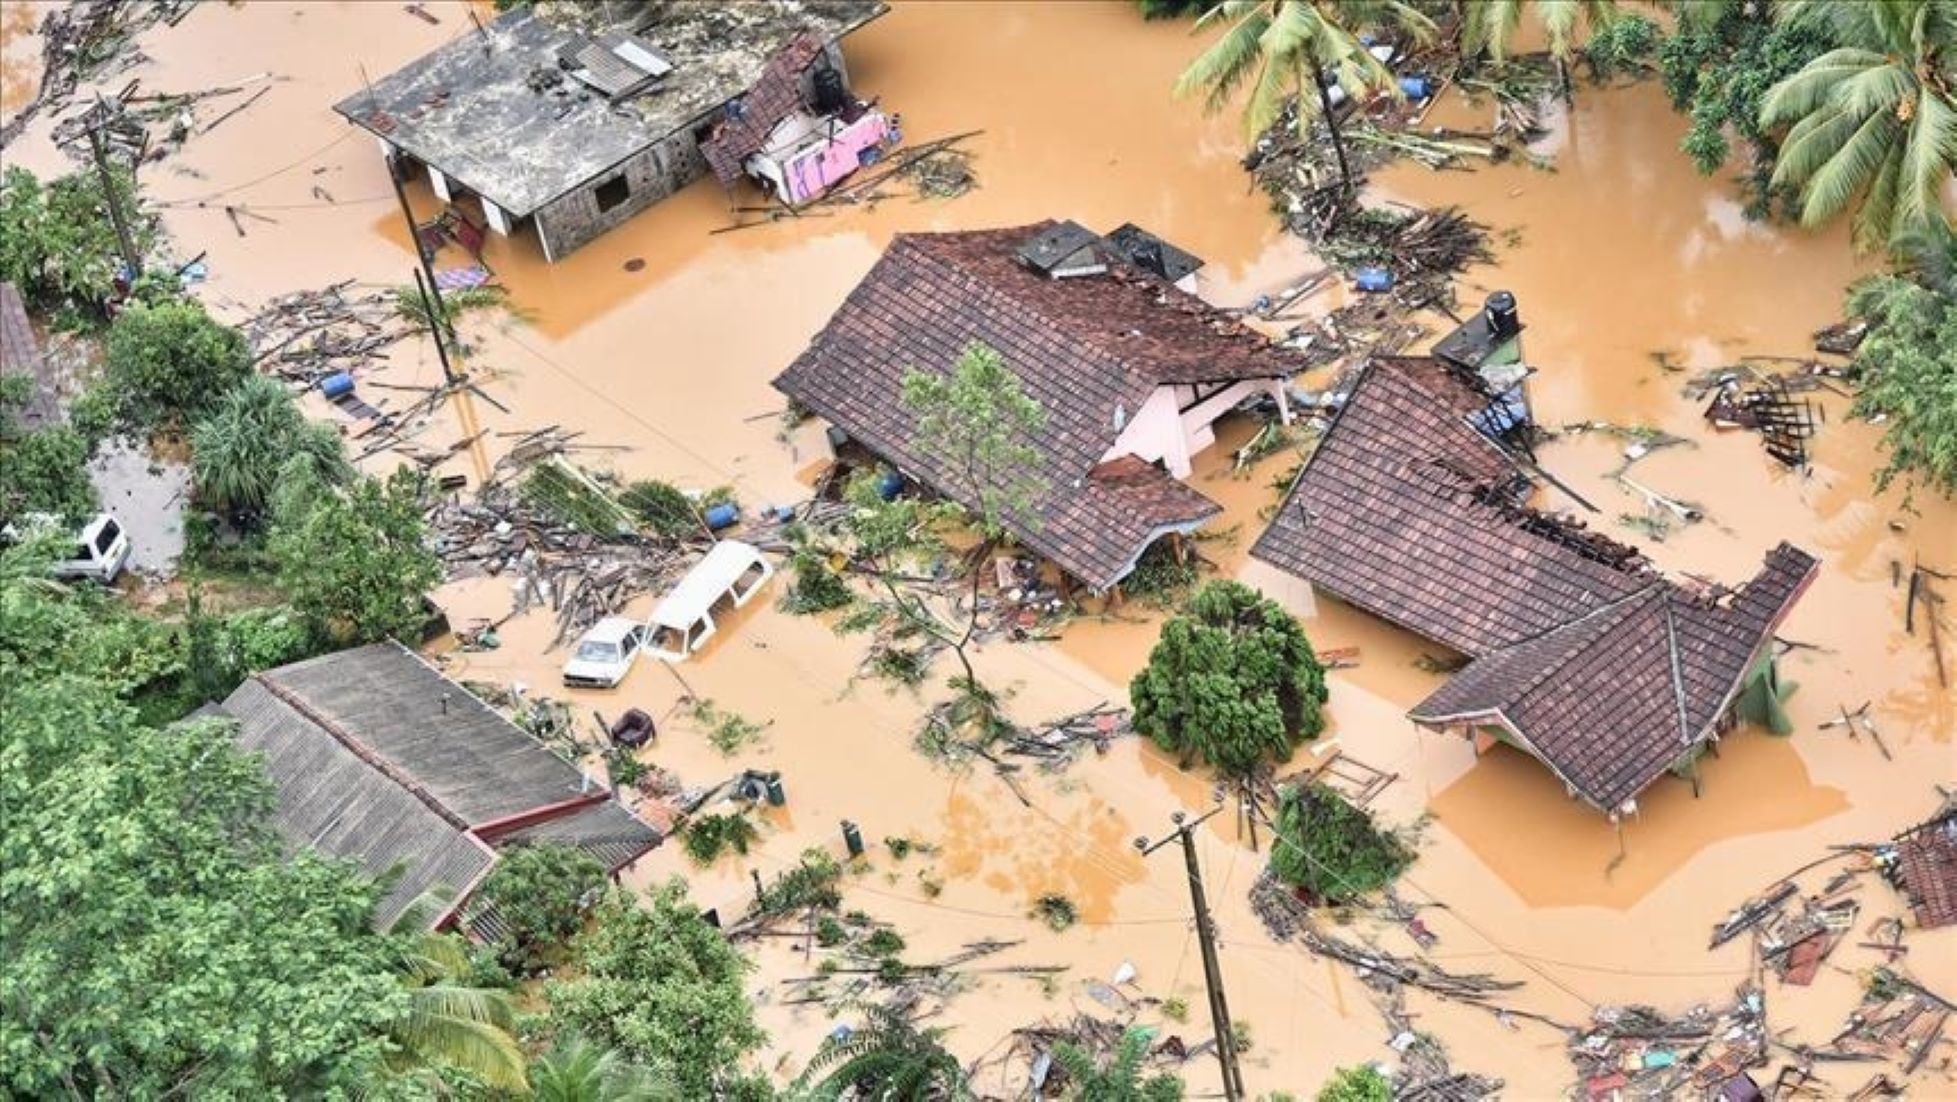 Over 5,000 People Remain Affected By Weather-Related Disasters In Sri Lanka